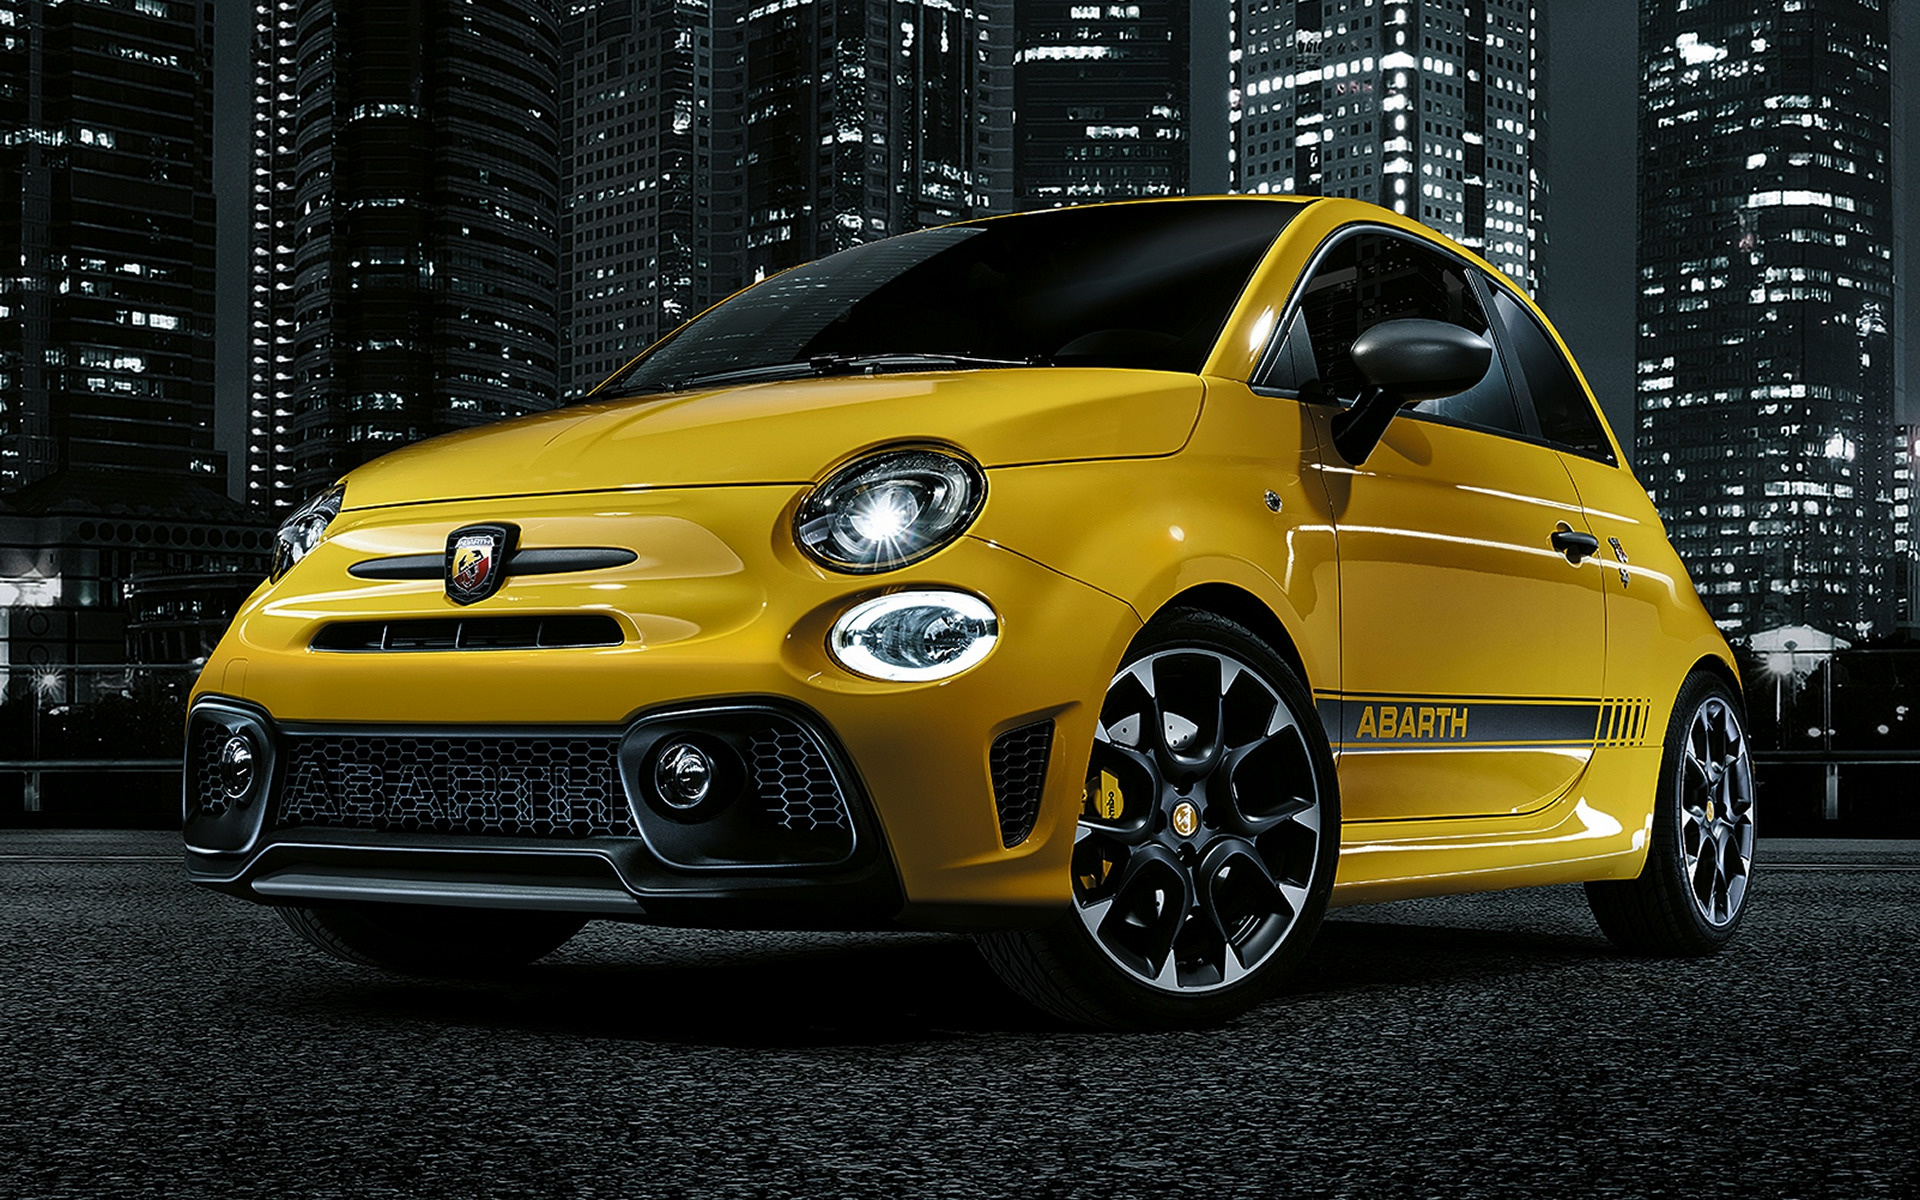 2016 Abarth 595 Competizione - Wallpapers and HD Images | Car Pixel